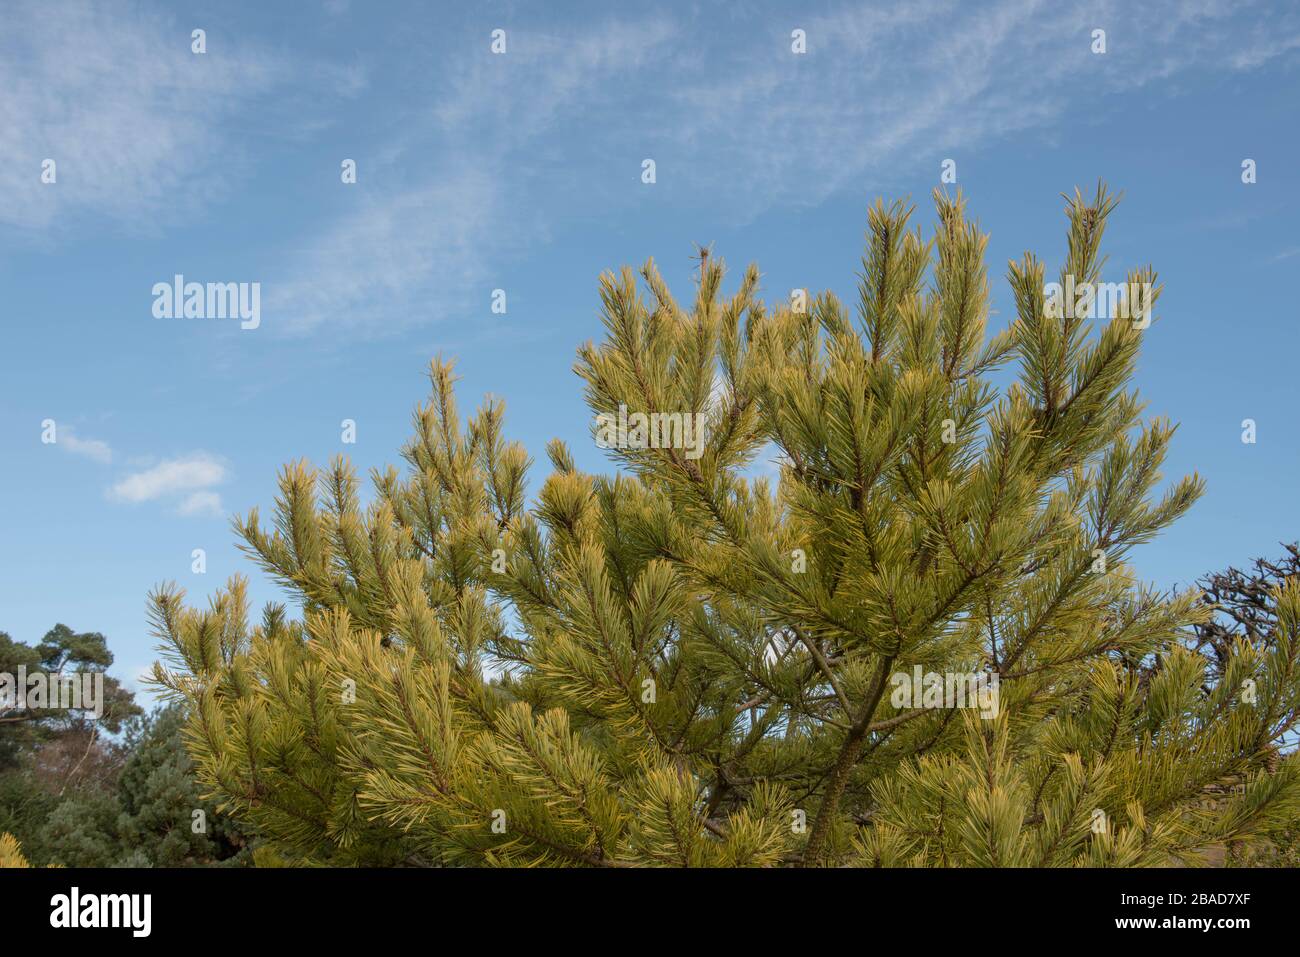 Green Foliage of an Evergreen Scots Pine Shrub (Pinus sylvestris 'Gold Coin') with a Bright Blue Sky Background in a Garden in Rural Devon,England,UK Stock Photo